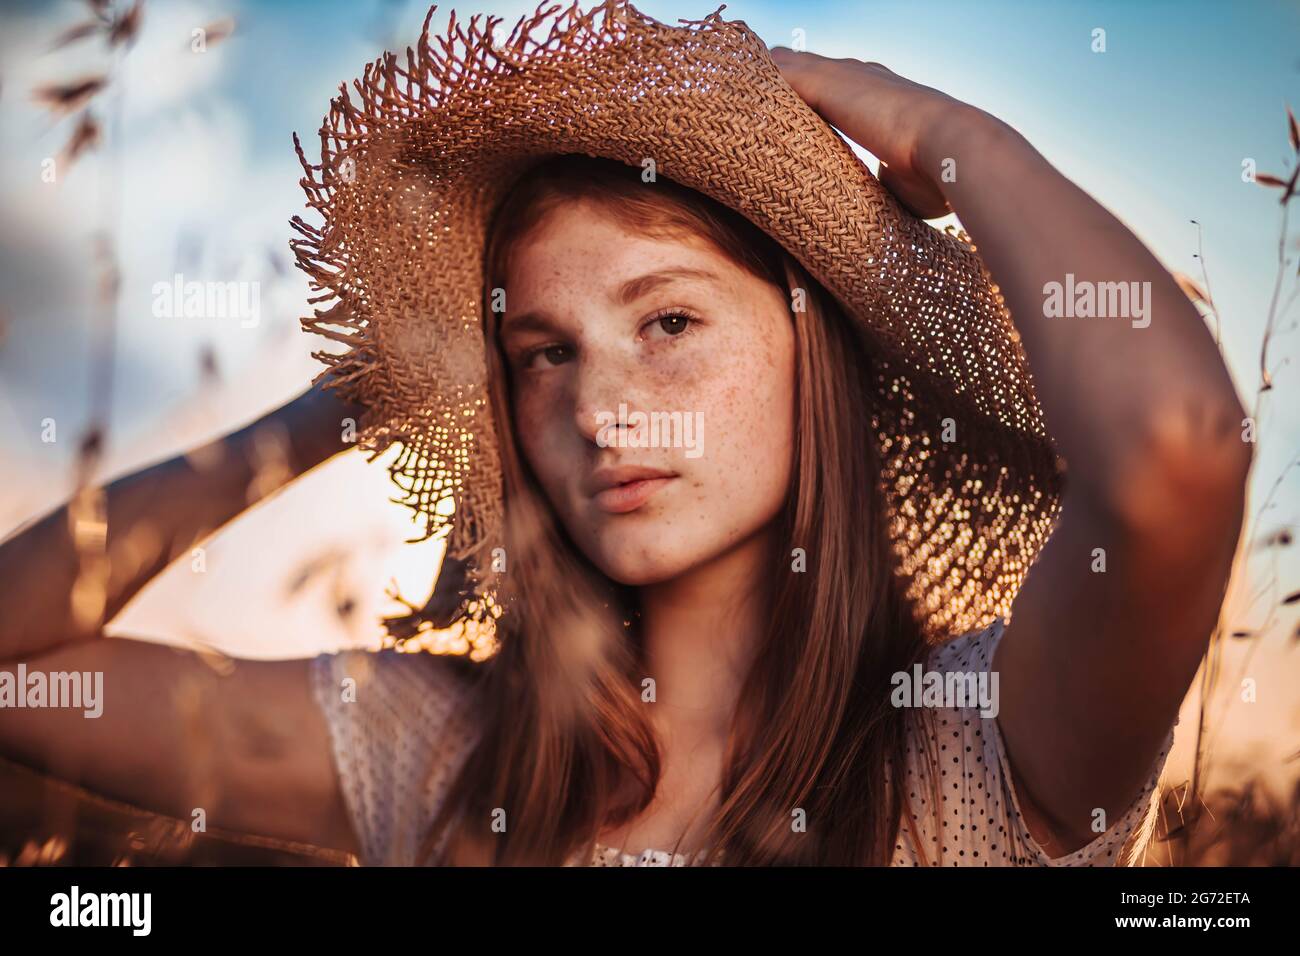 Portrait of young, teen, ginger girl with freckles in the wheat field wearing a summer hat Stock Photo